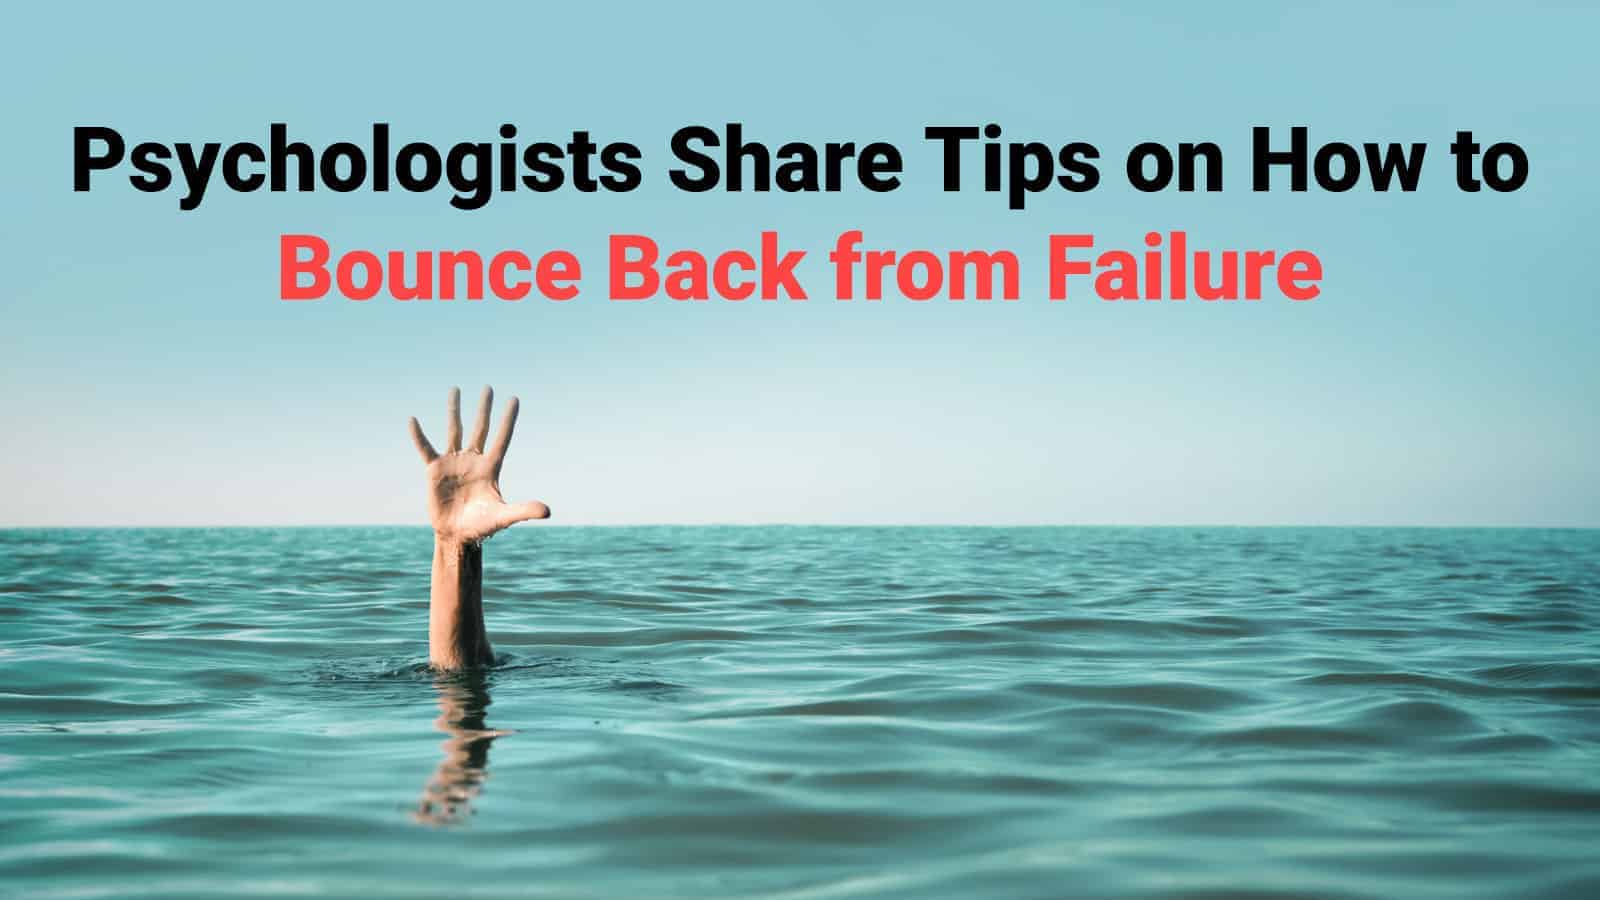 Psychologists Share Tips on How to Bounce Back from Failure